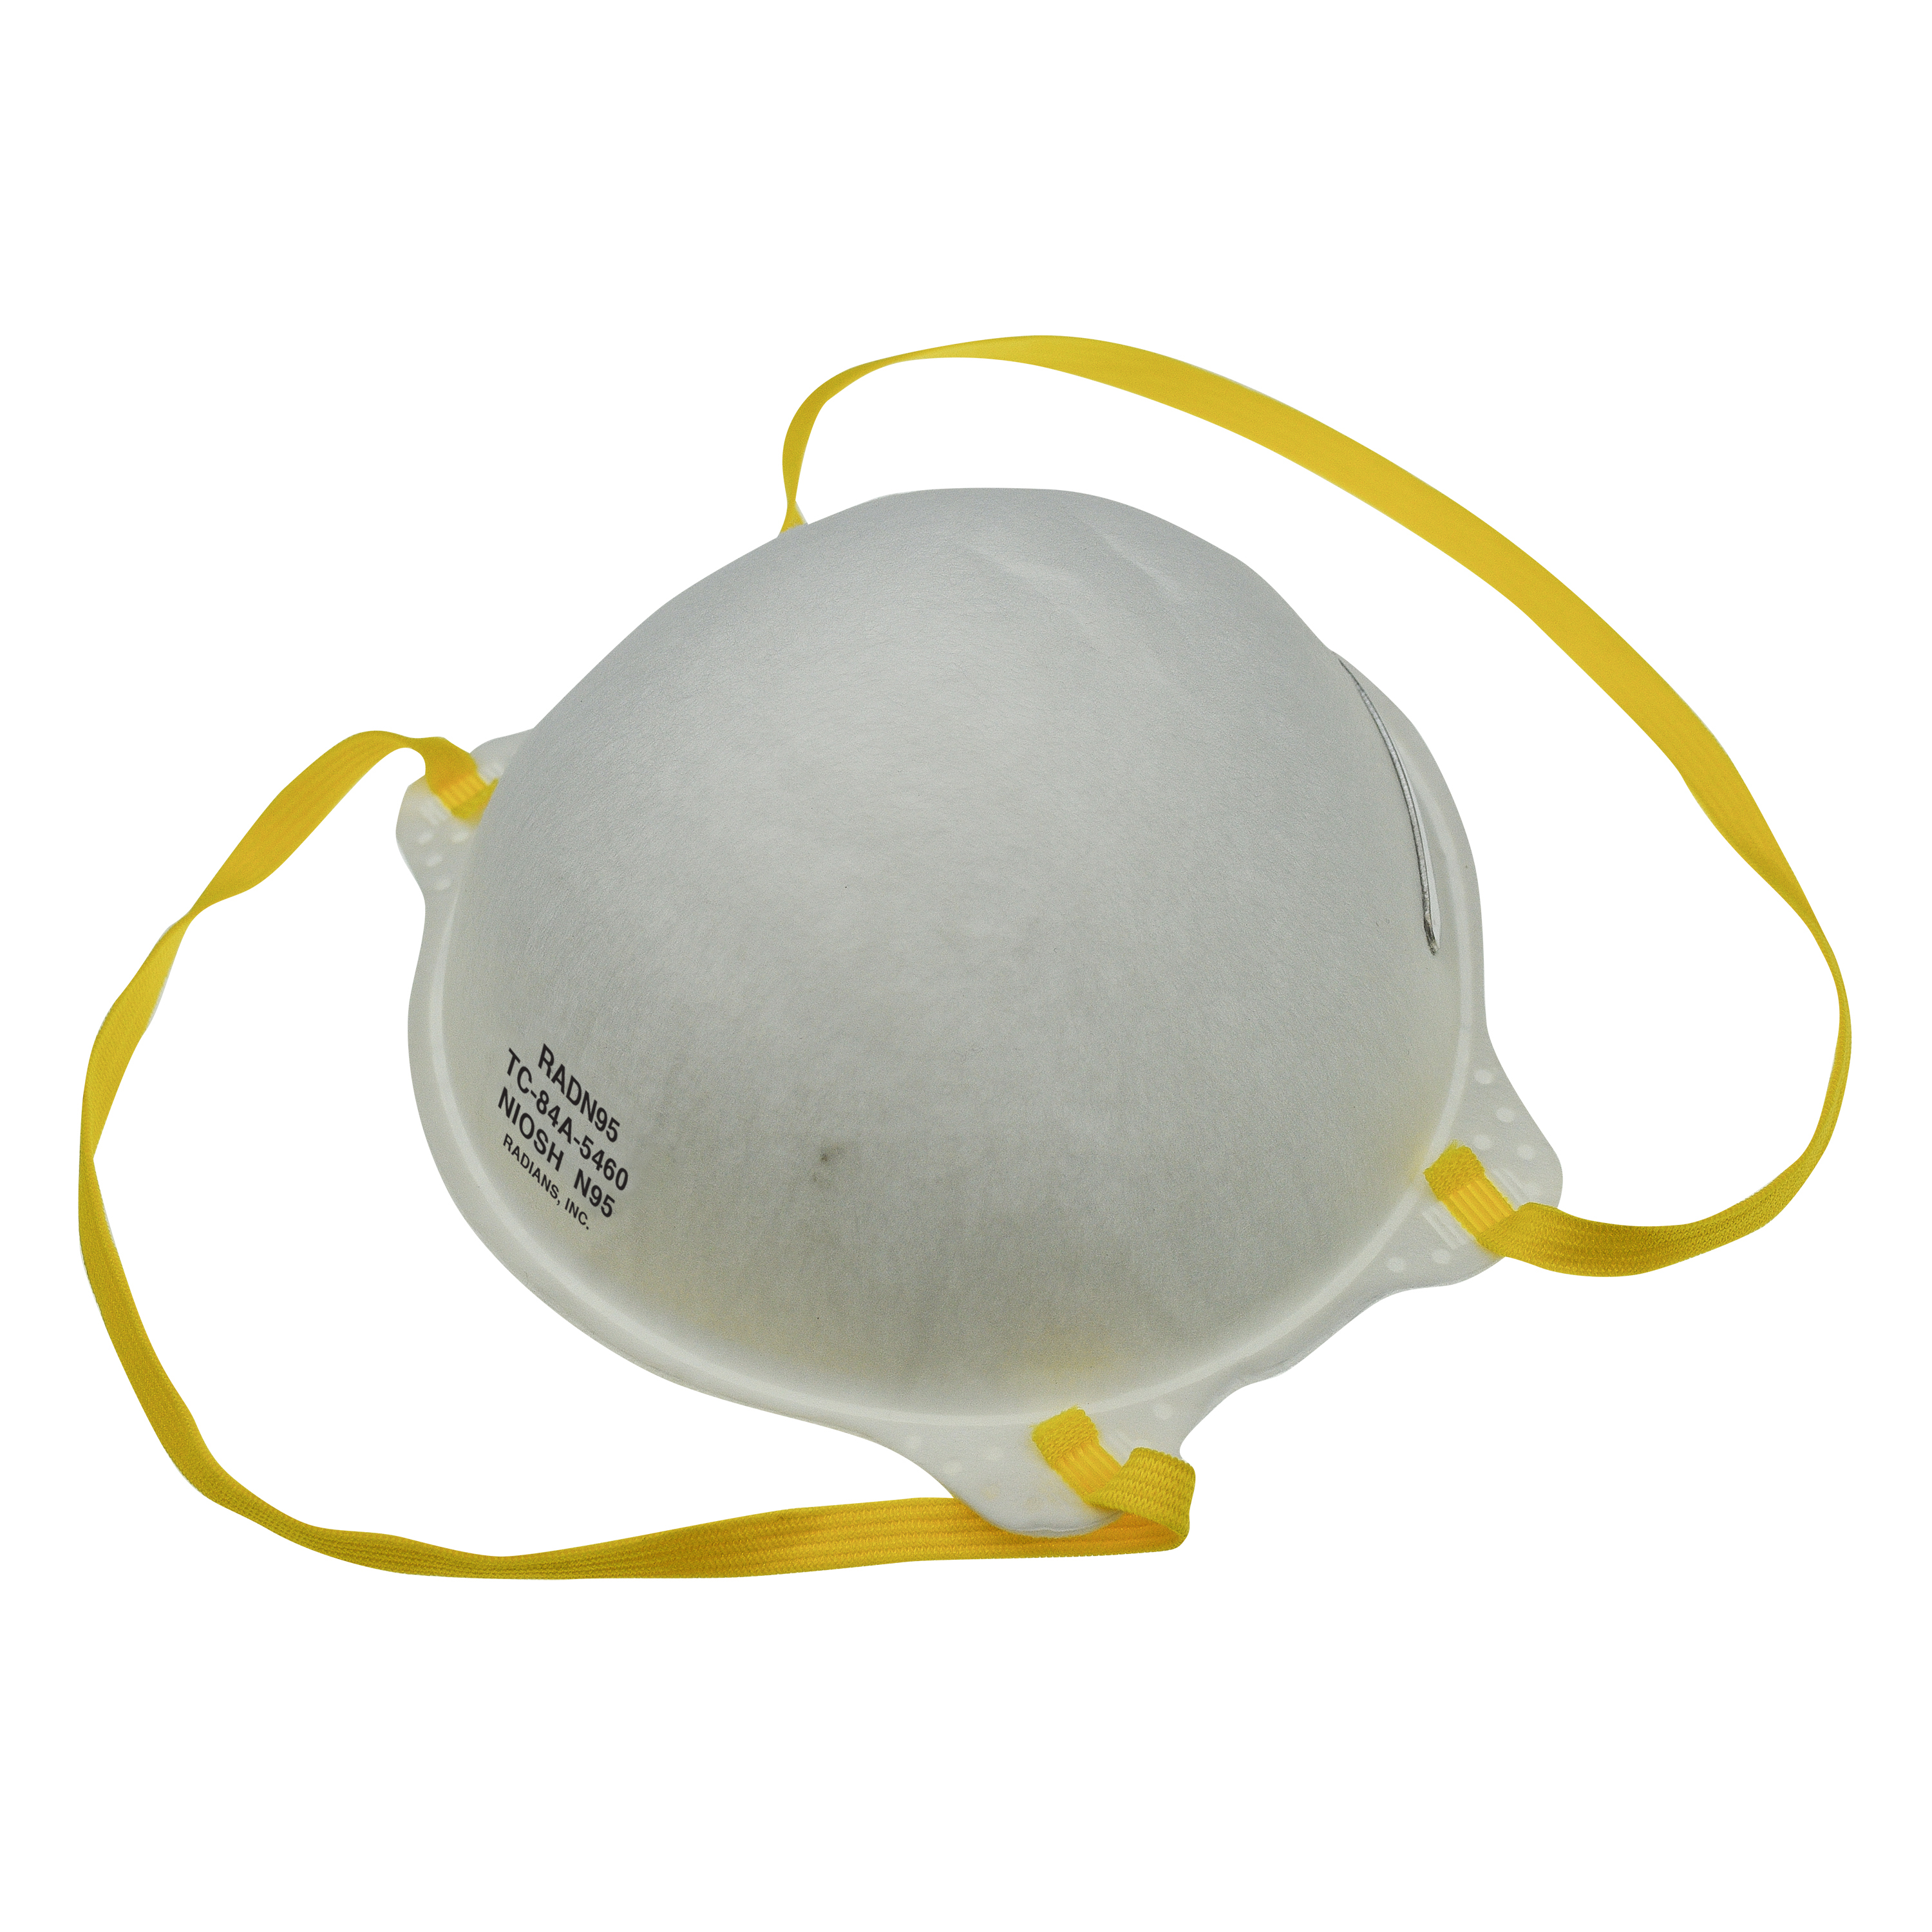 Stanley® N95 Particulate Respirator 20 Pack Box